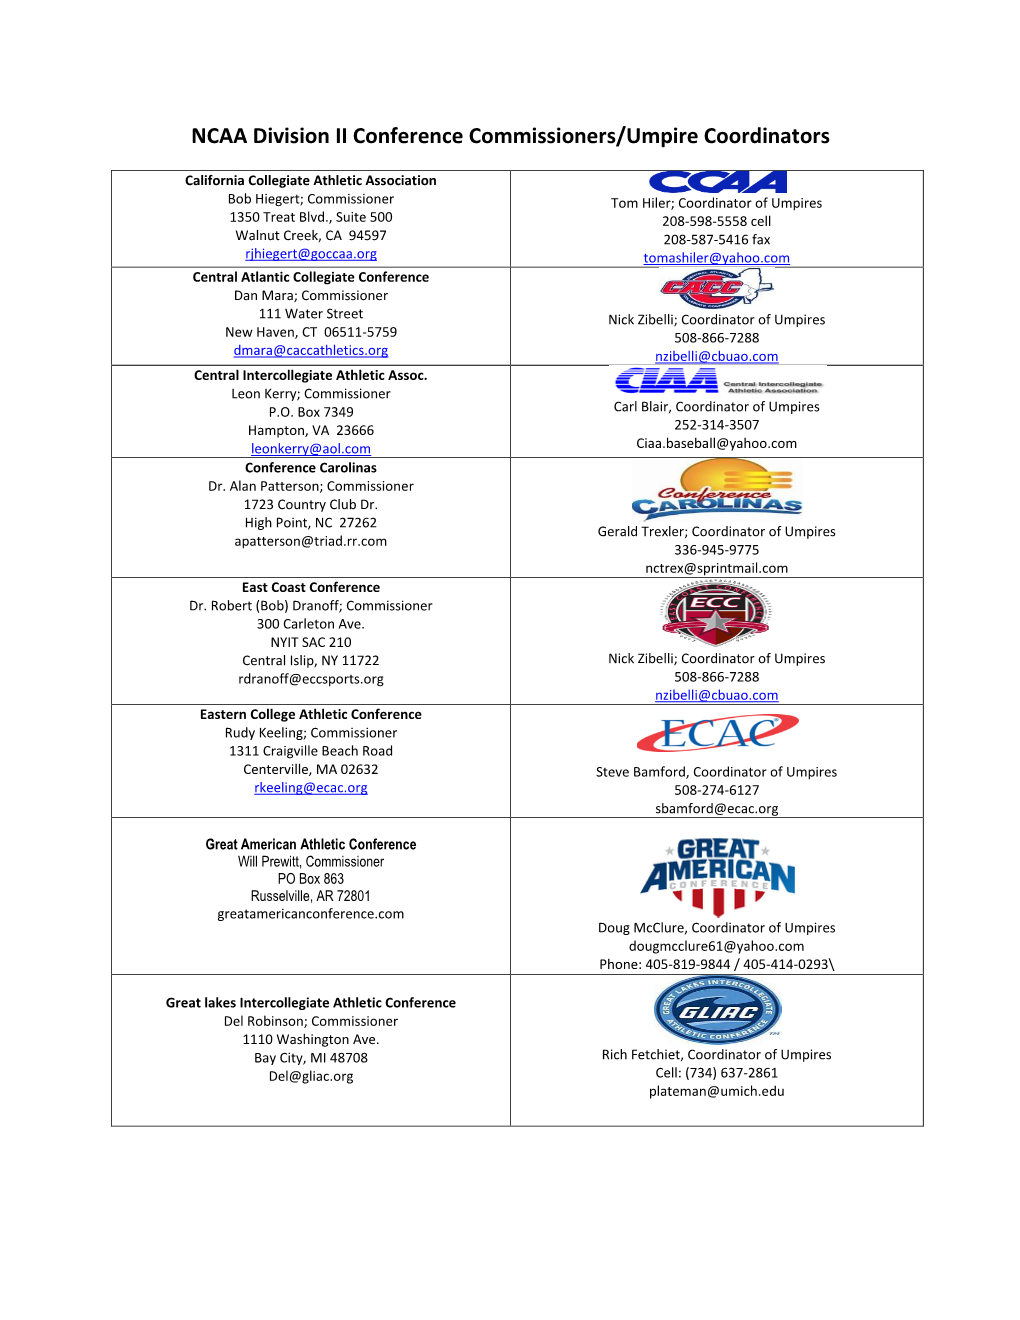 NCAA Division II Conference Commissioners/Umpire Coordinators